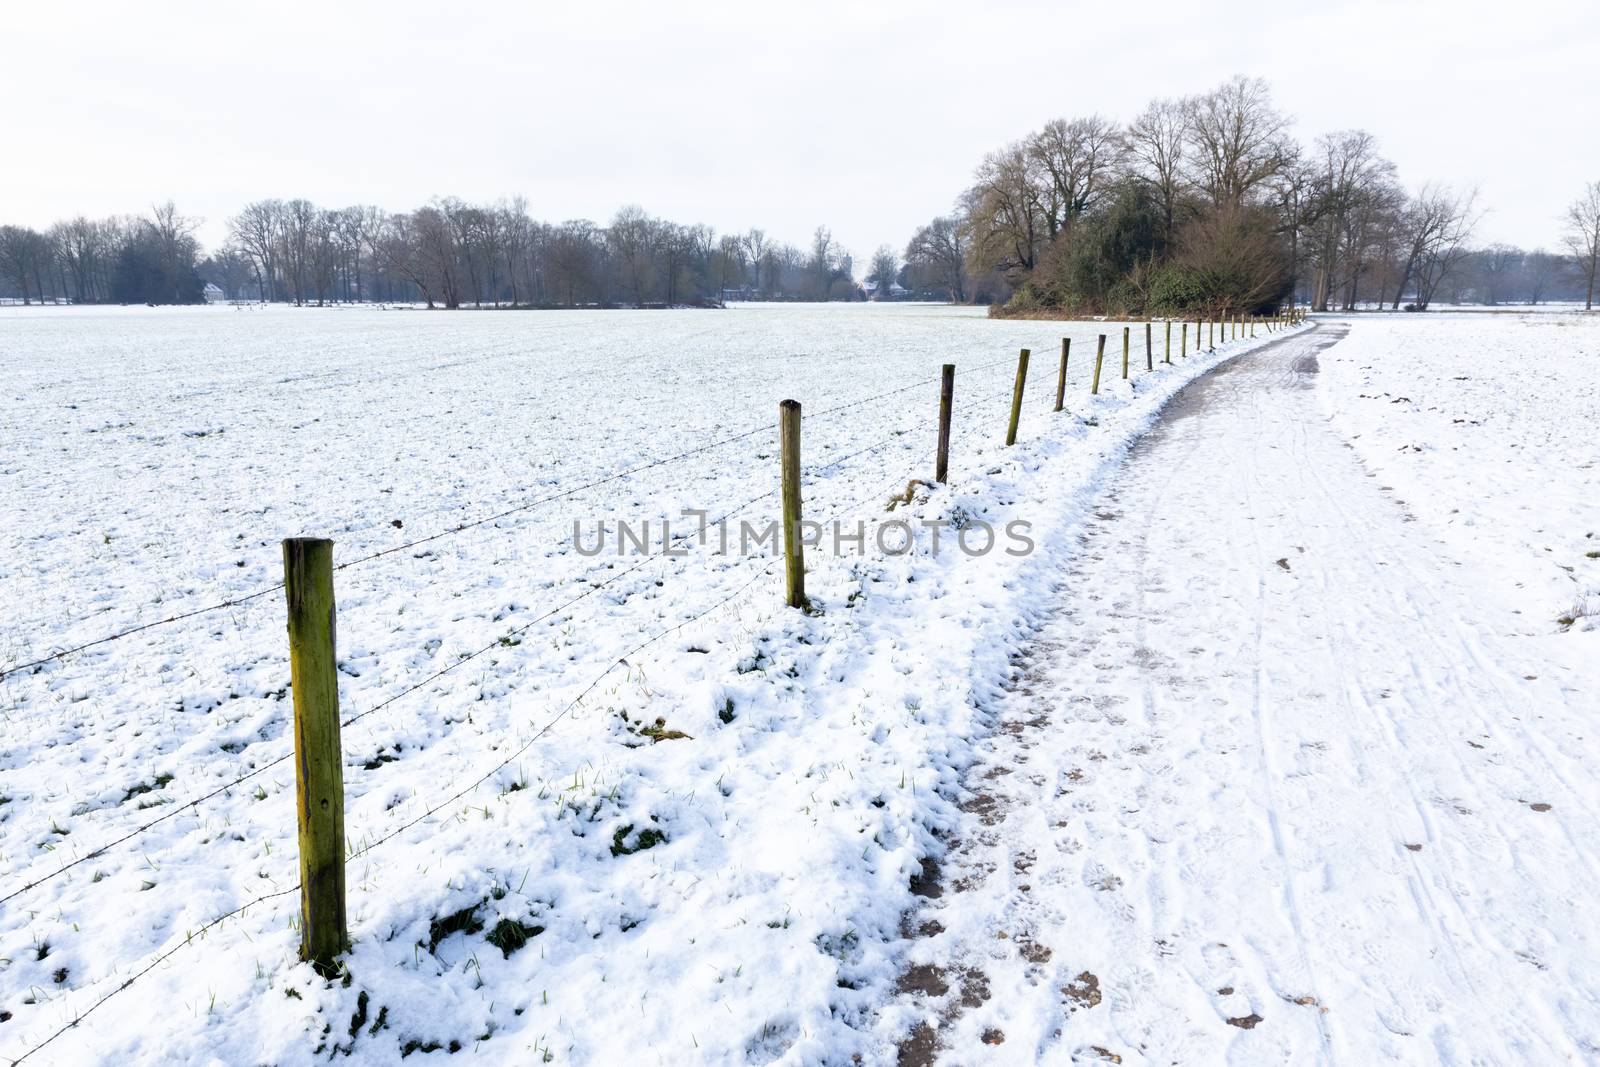 Snow landscape with footpath between pastures in winter season